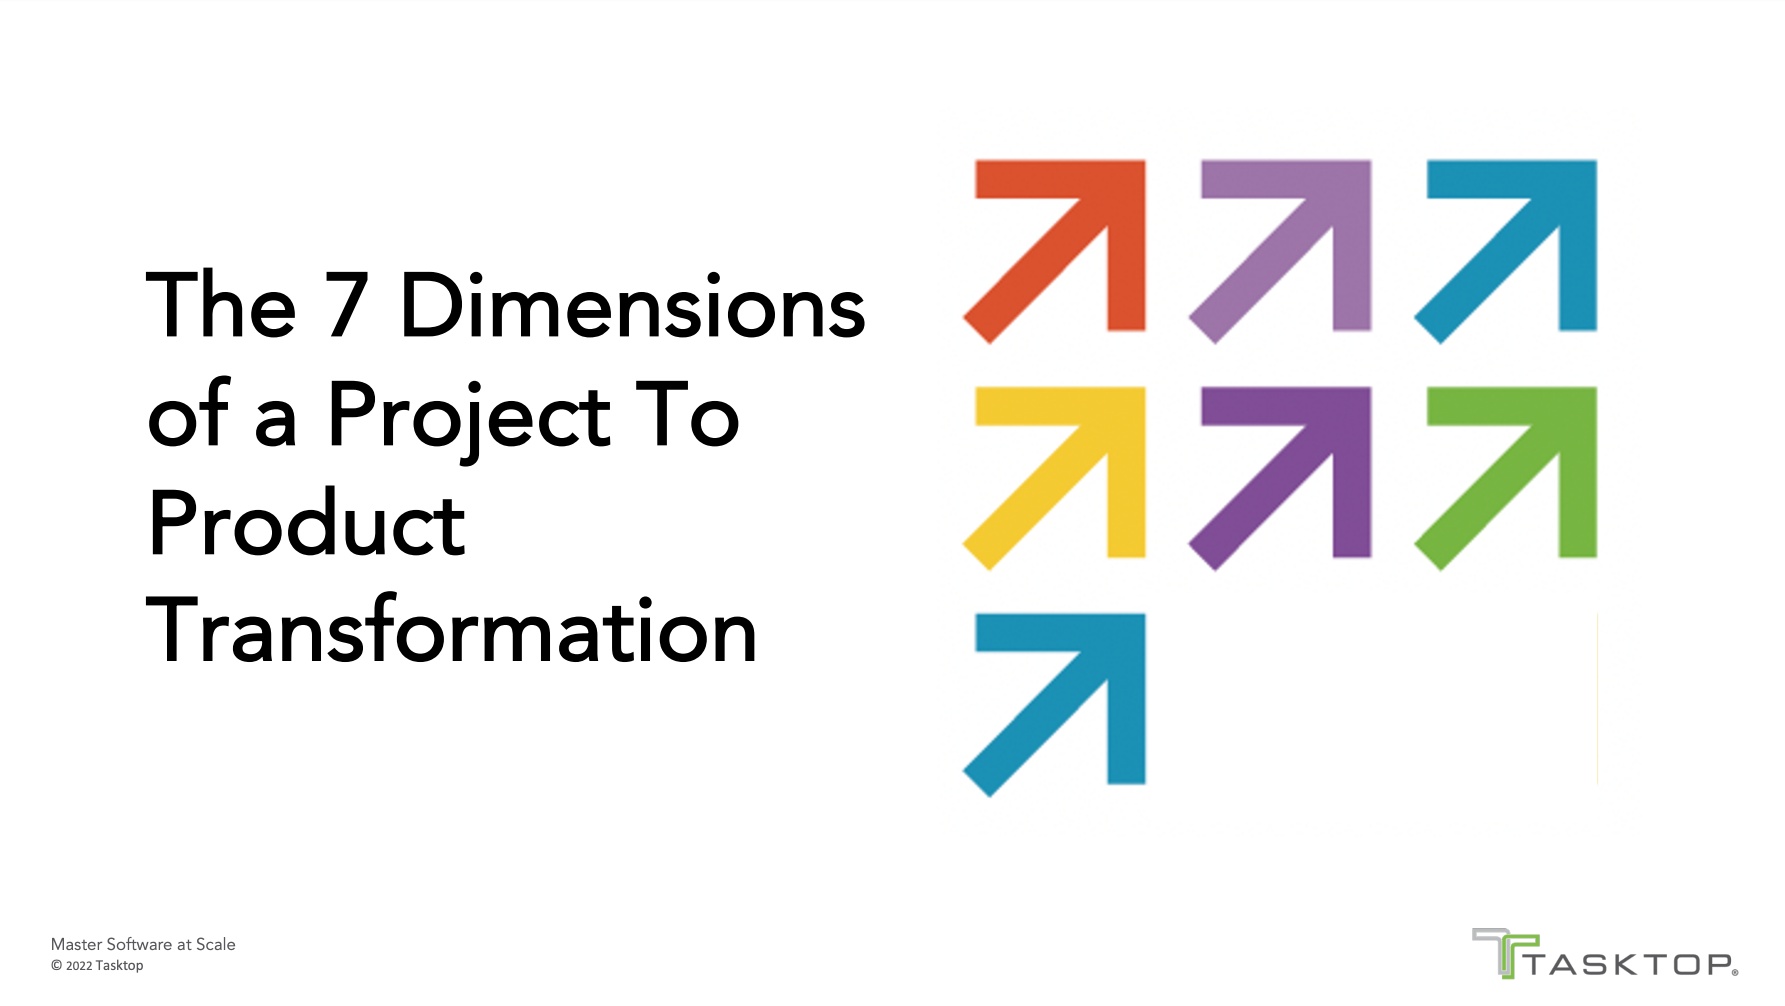 The 7 Dimensions of a Project to Product Transformation